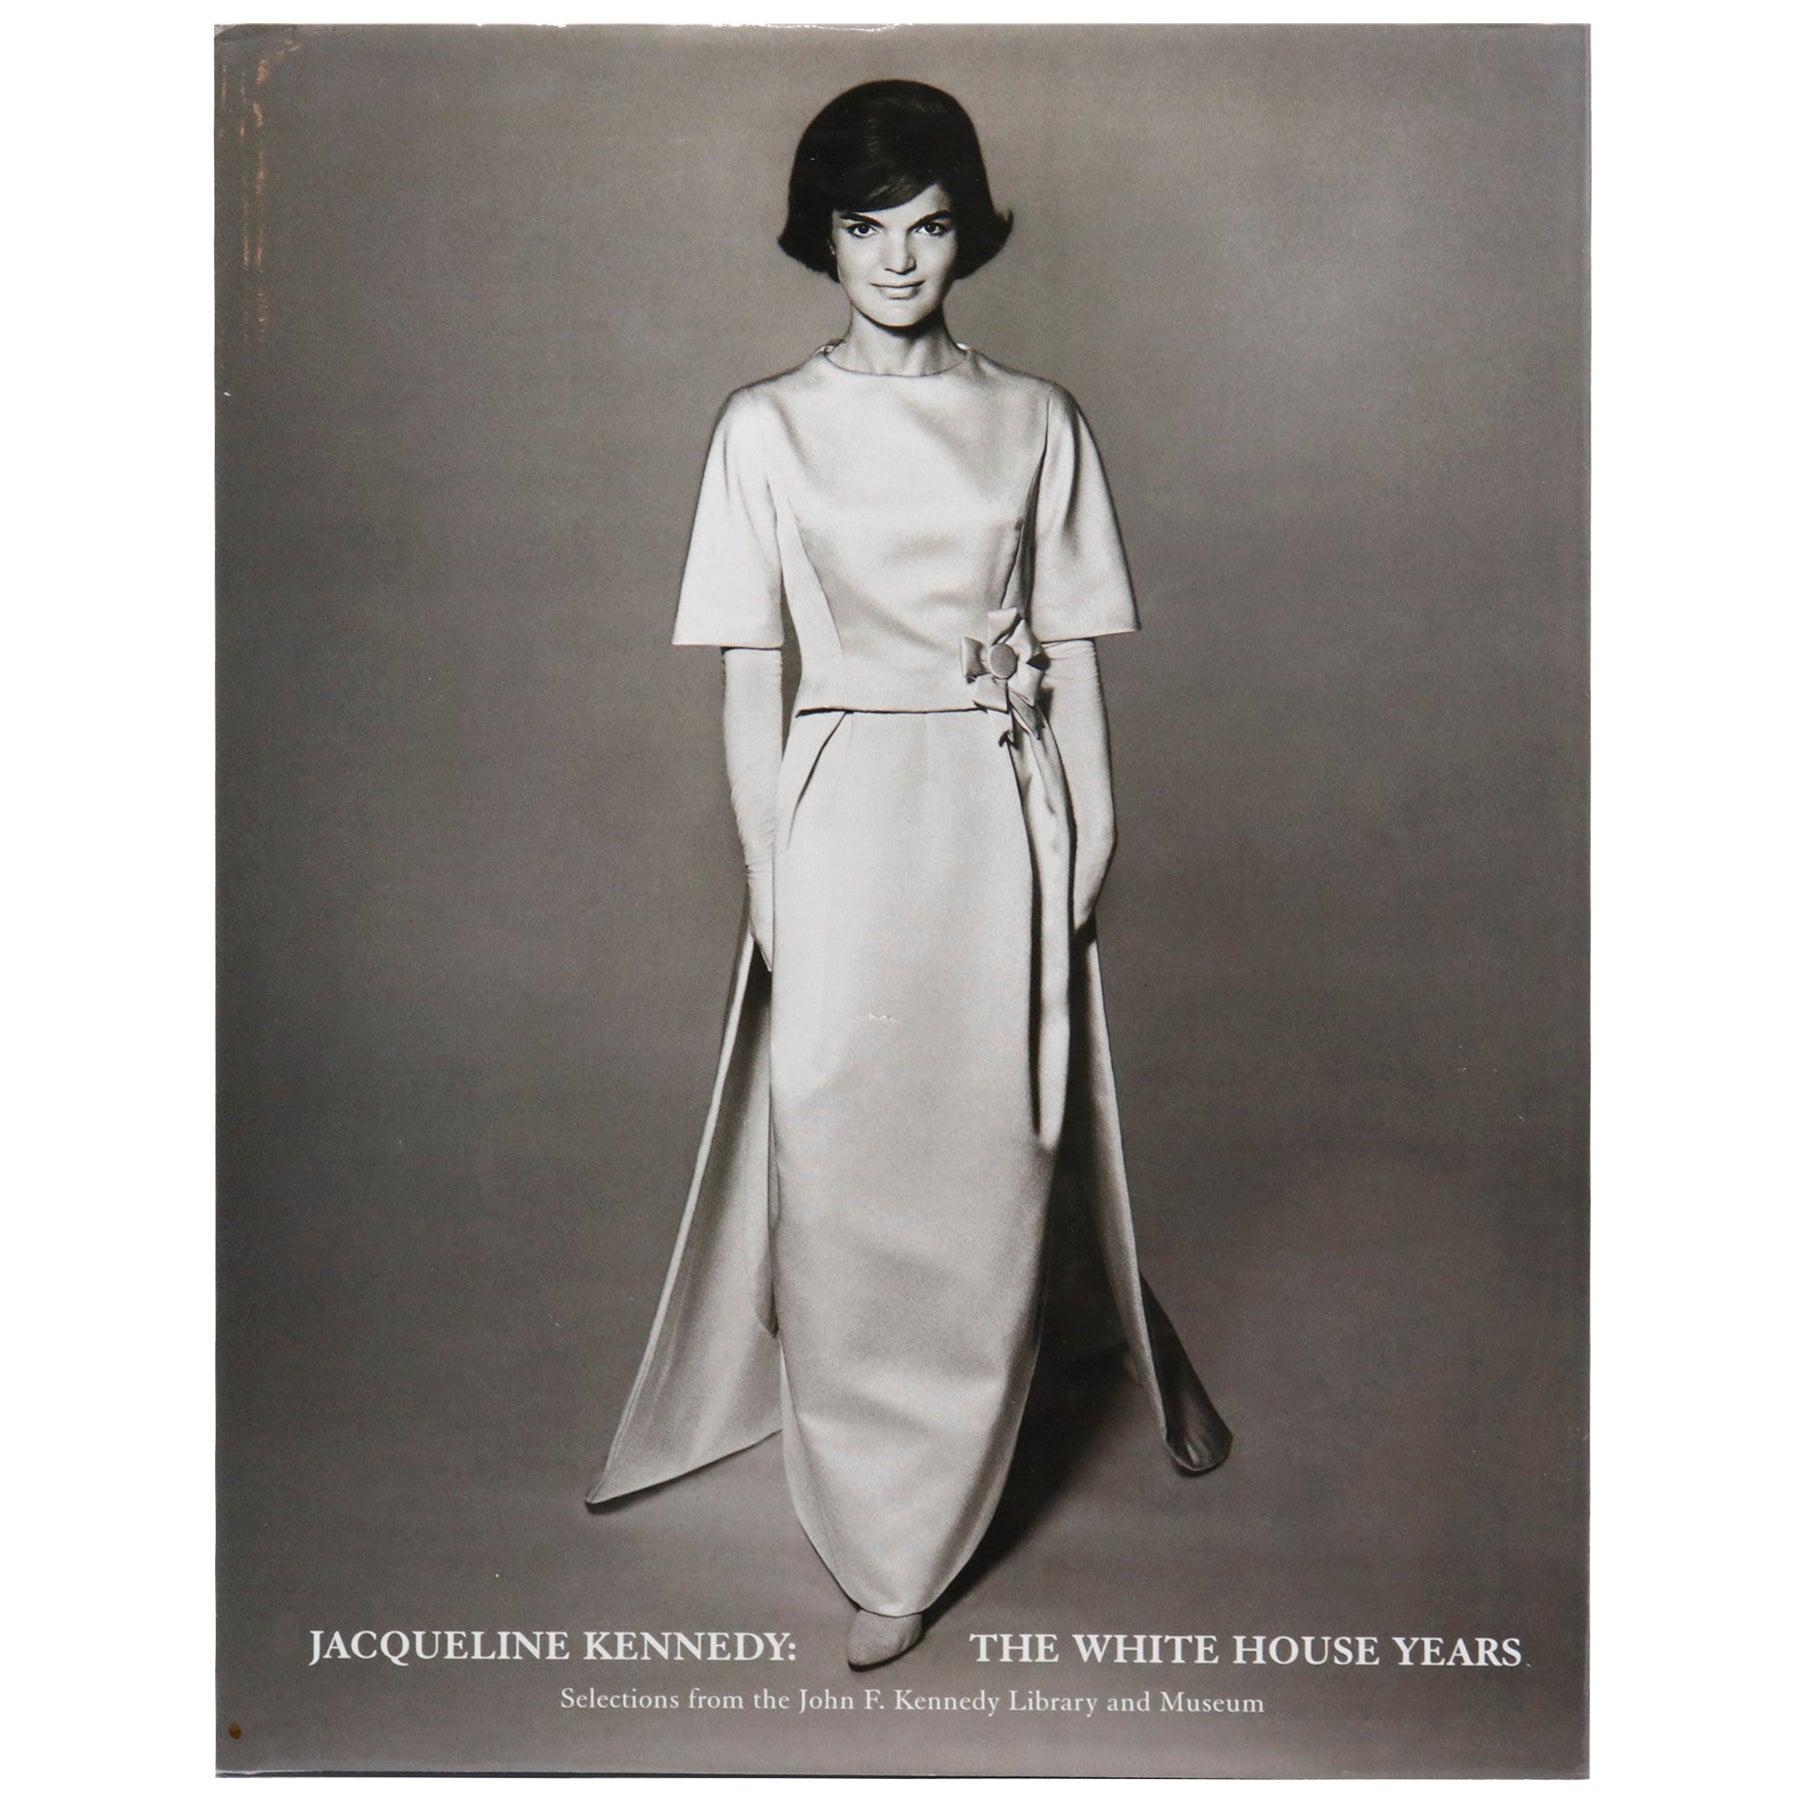 Jacqueline Kennedy: The White House Years